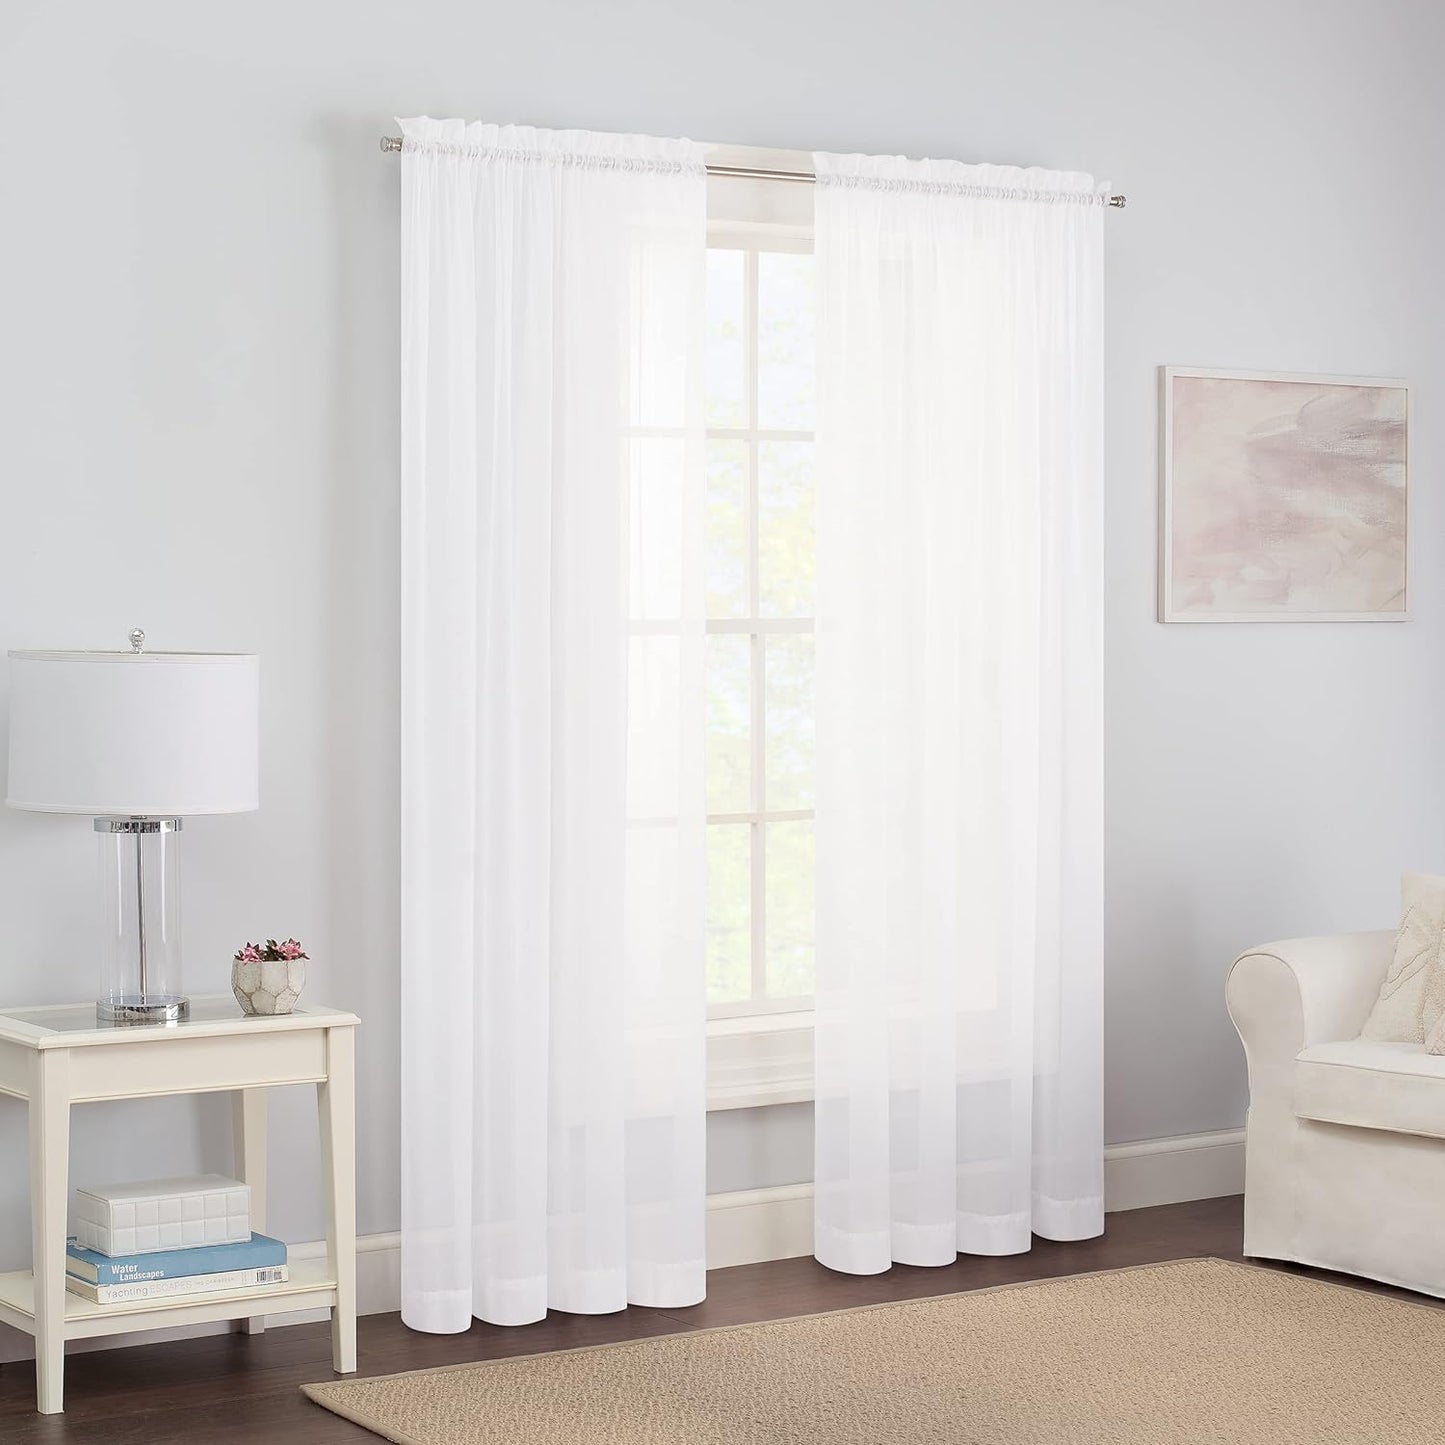 Pairs to Go Victoria Voile Modern Sheer Rod Pocket Window Curtains for Living Room (2 Panels), 59 in X 84 In, Taupe  Ellery Homestyles White Curtains 59 In X 84 In